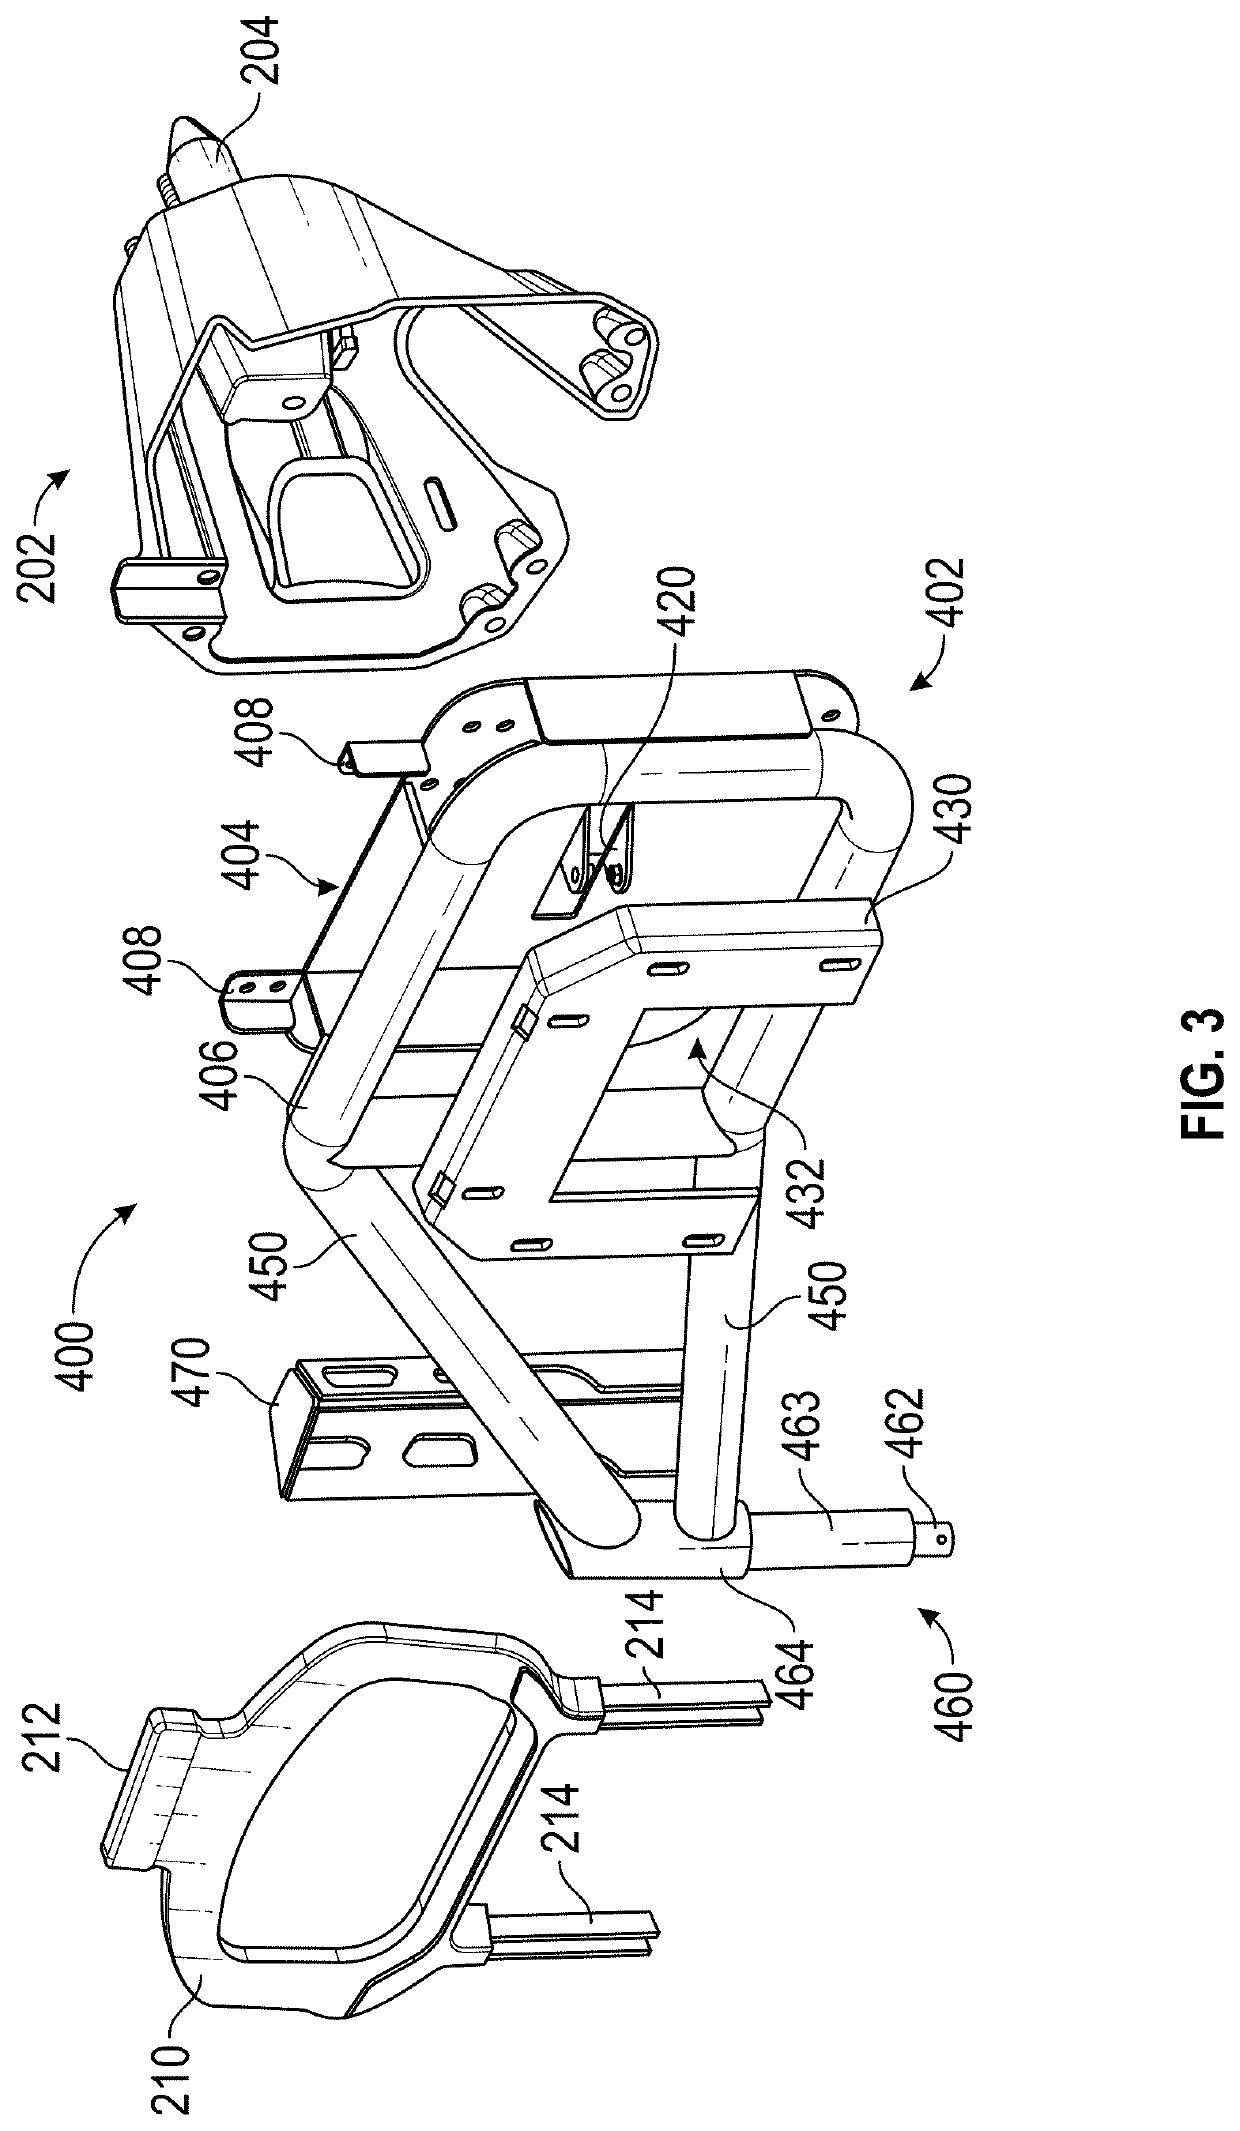 Swing away support assembly for spare tire carrier